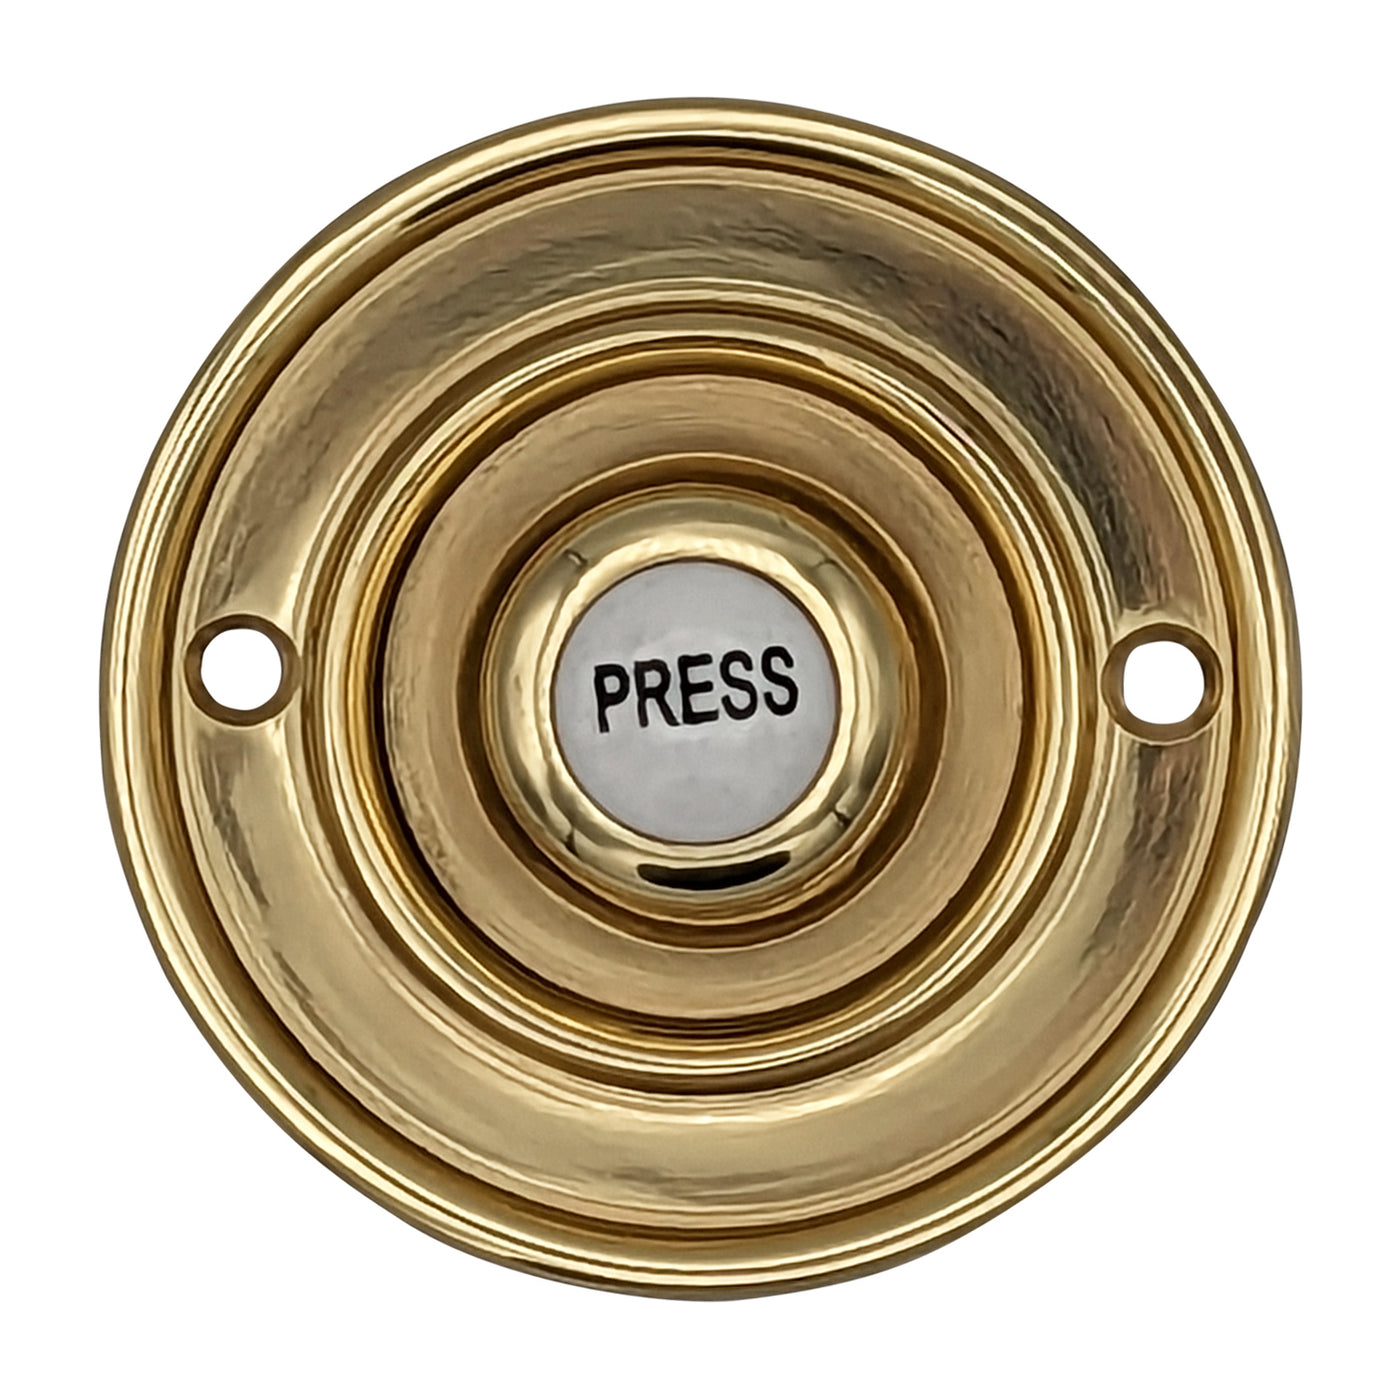 2 1/3 Inch Solid Brass Porcelain "Press" Doorbell Button (Several Finishes Available)